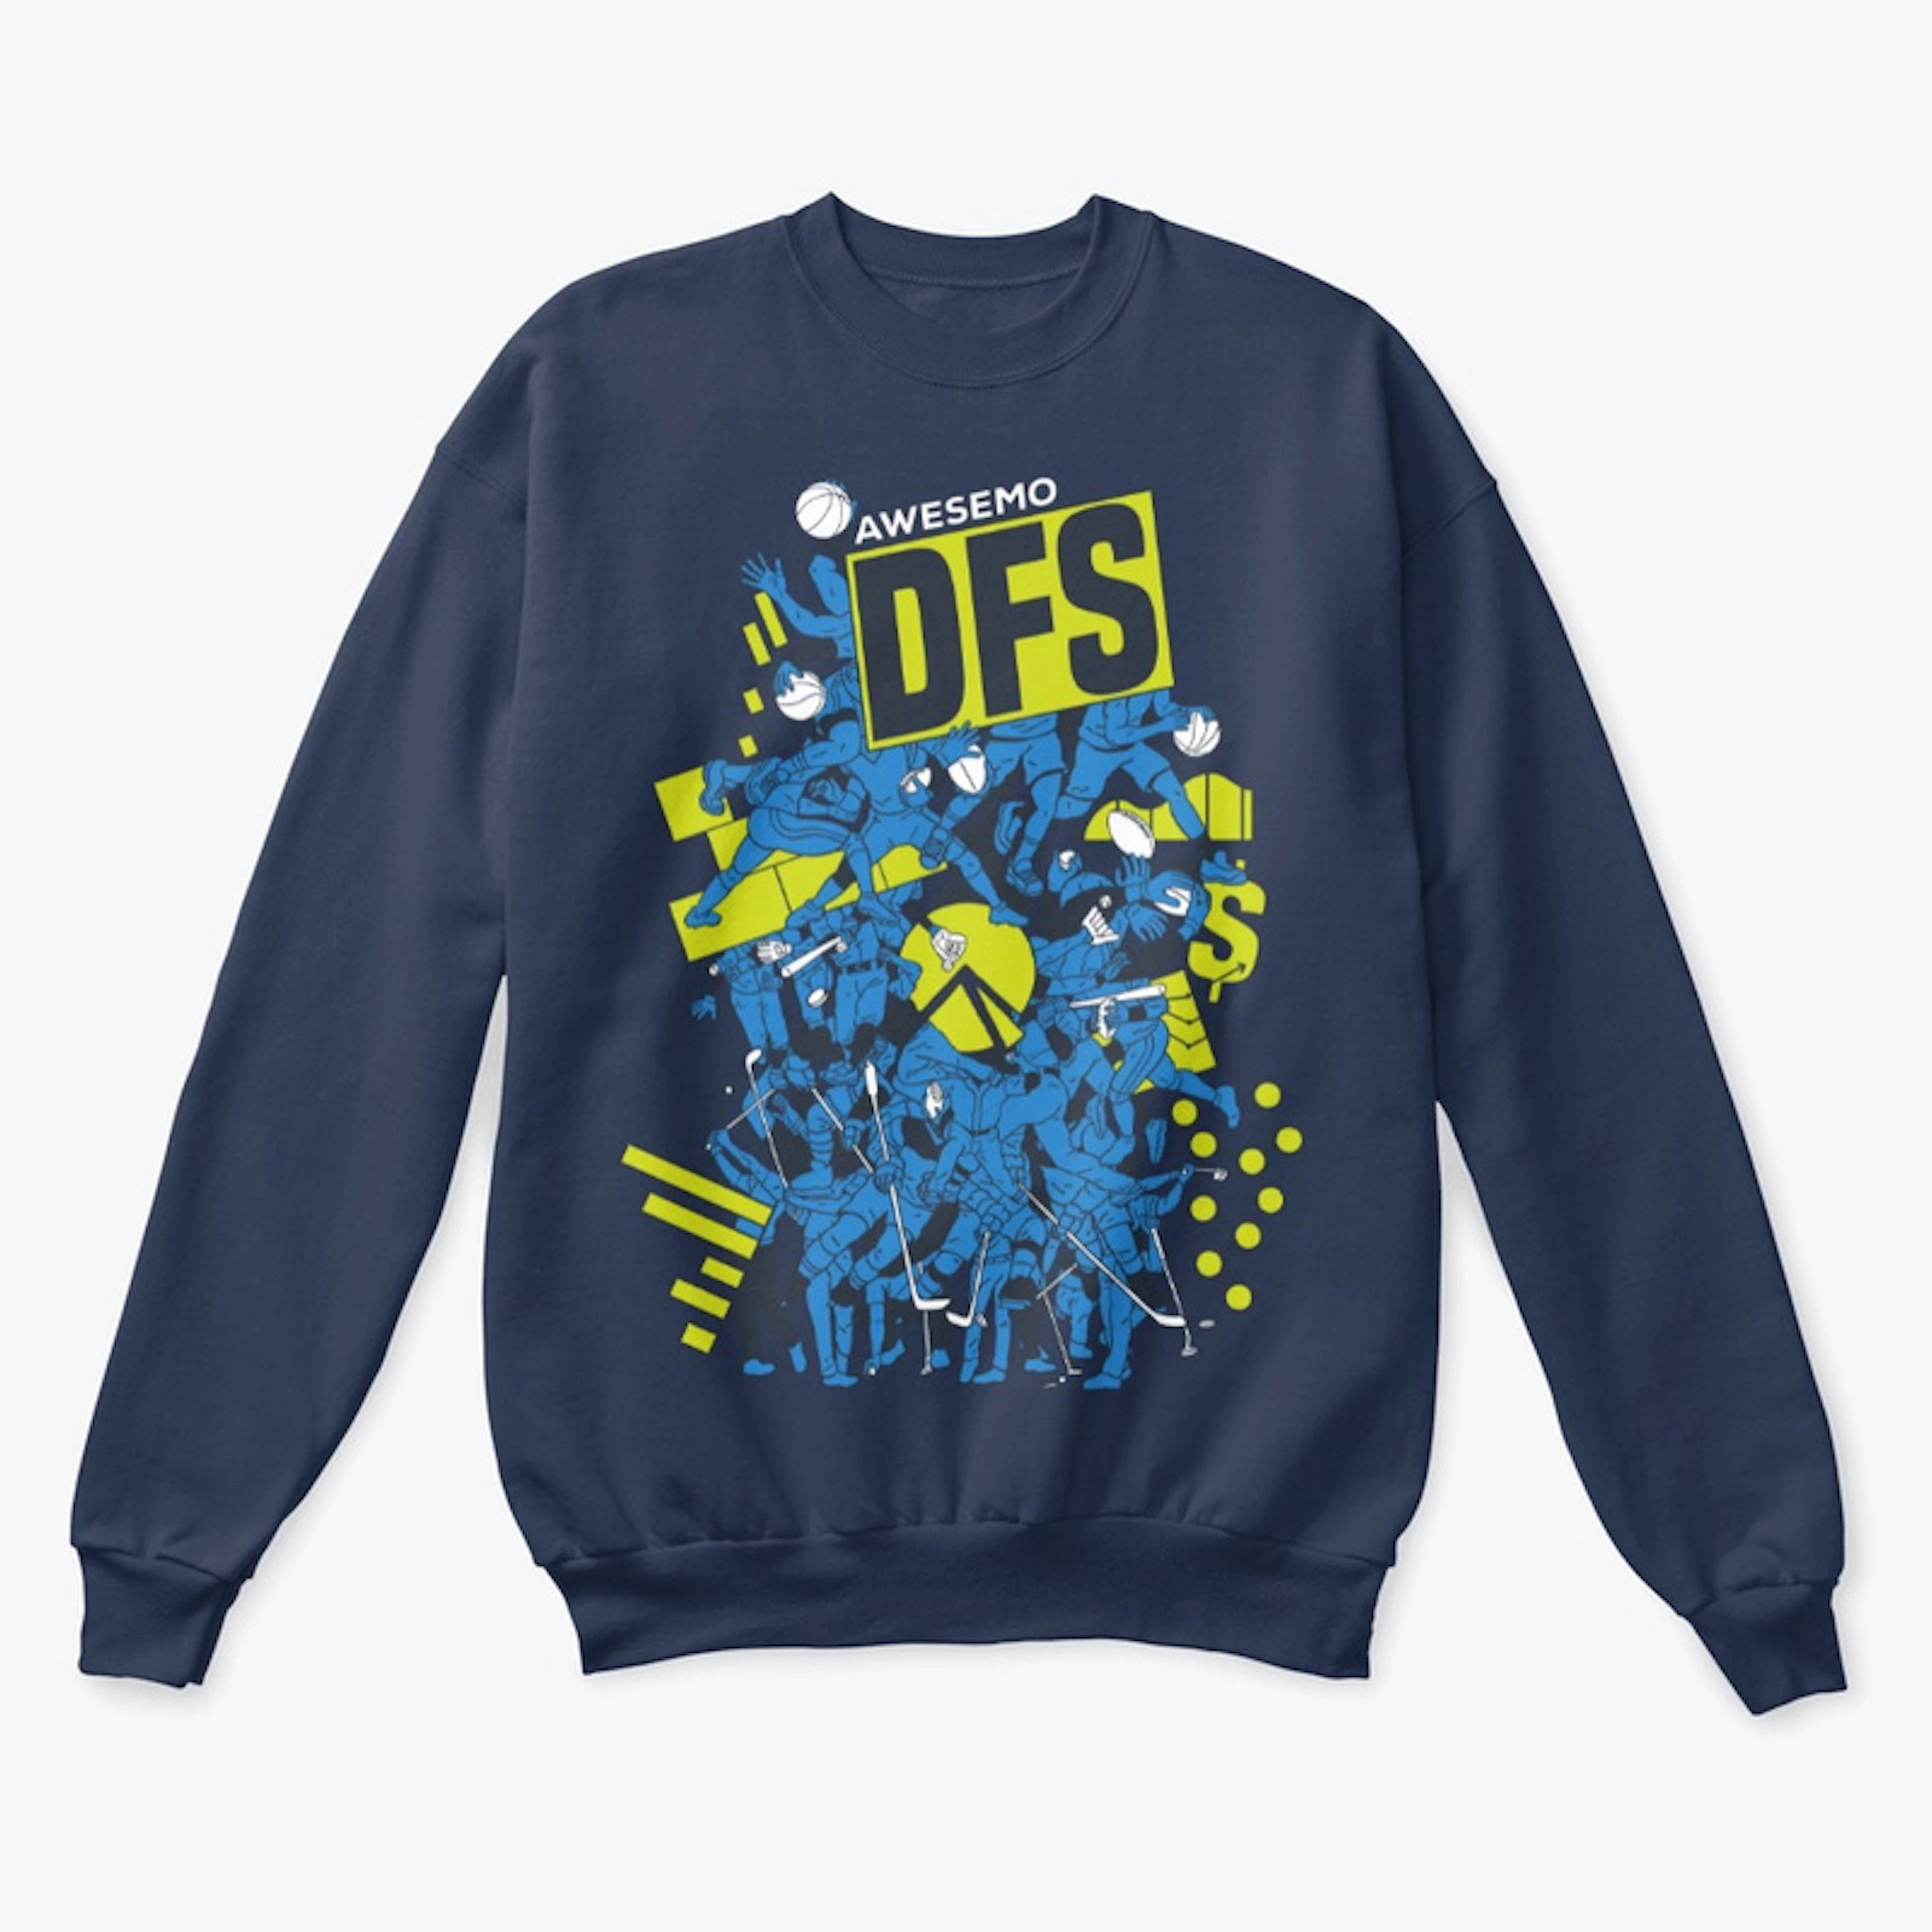 Awesemo DFS Illustrated Apparel